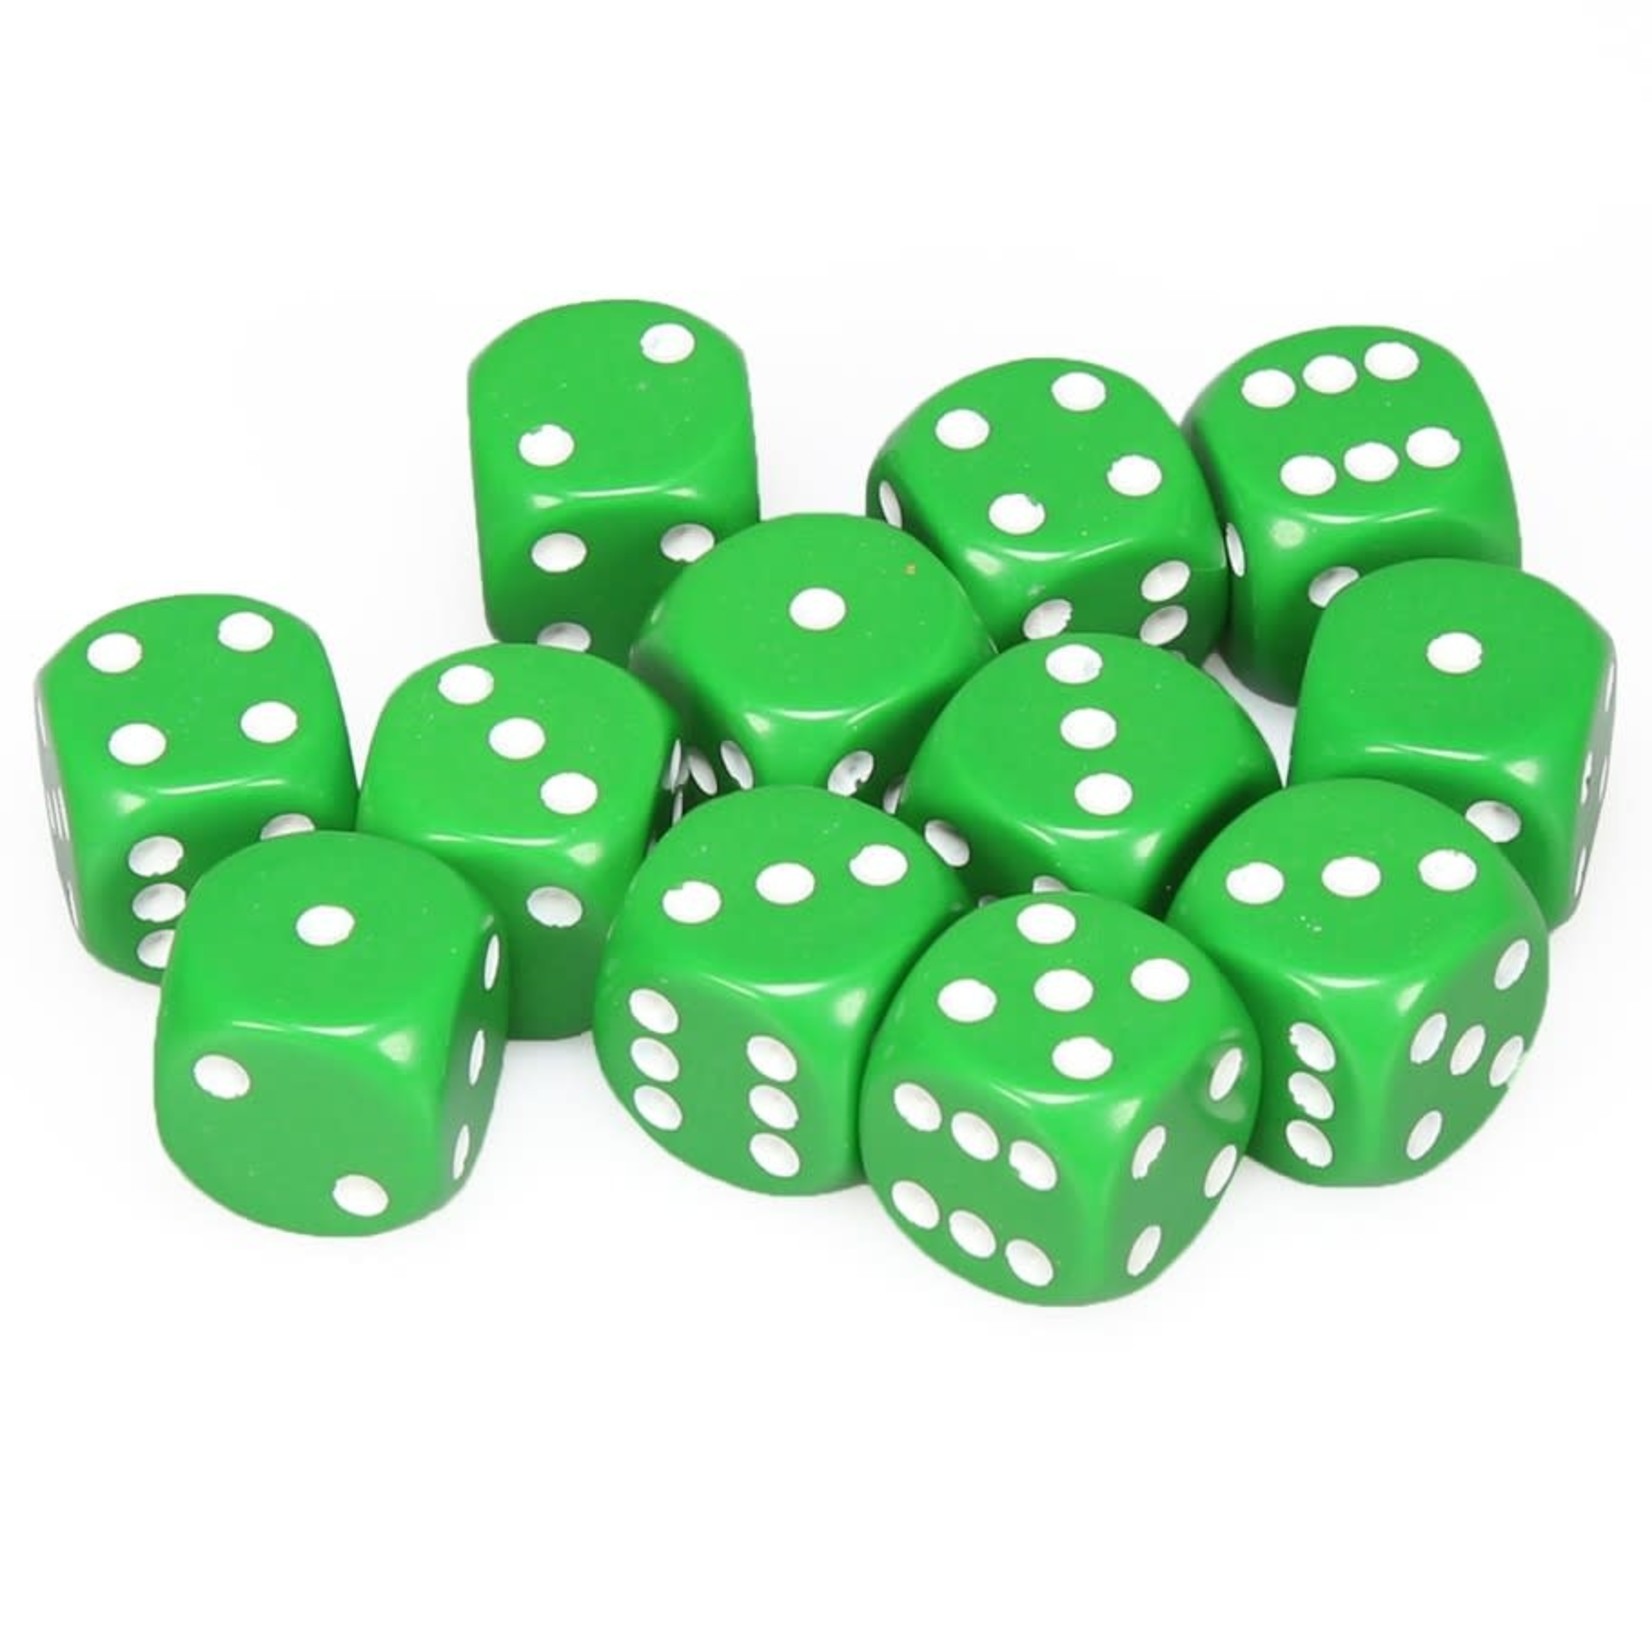 Chessex Chessex Opaque Green with White 16 mm d6 12 die set